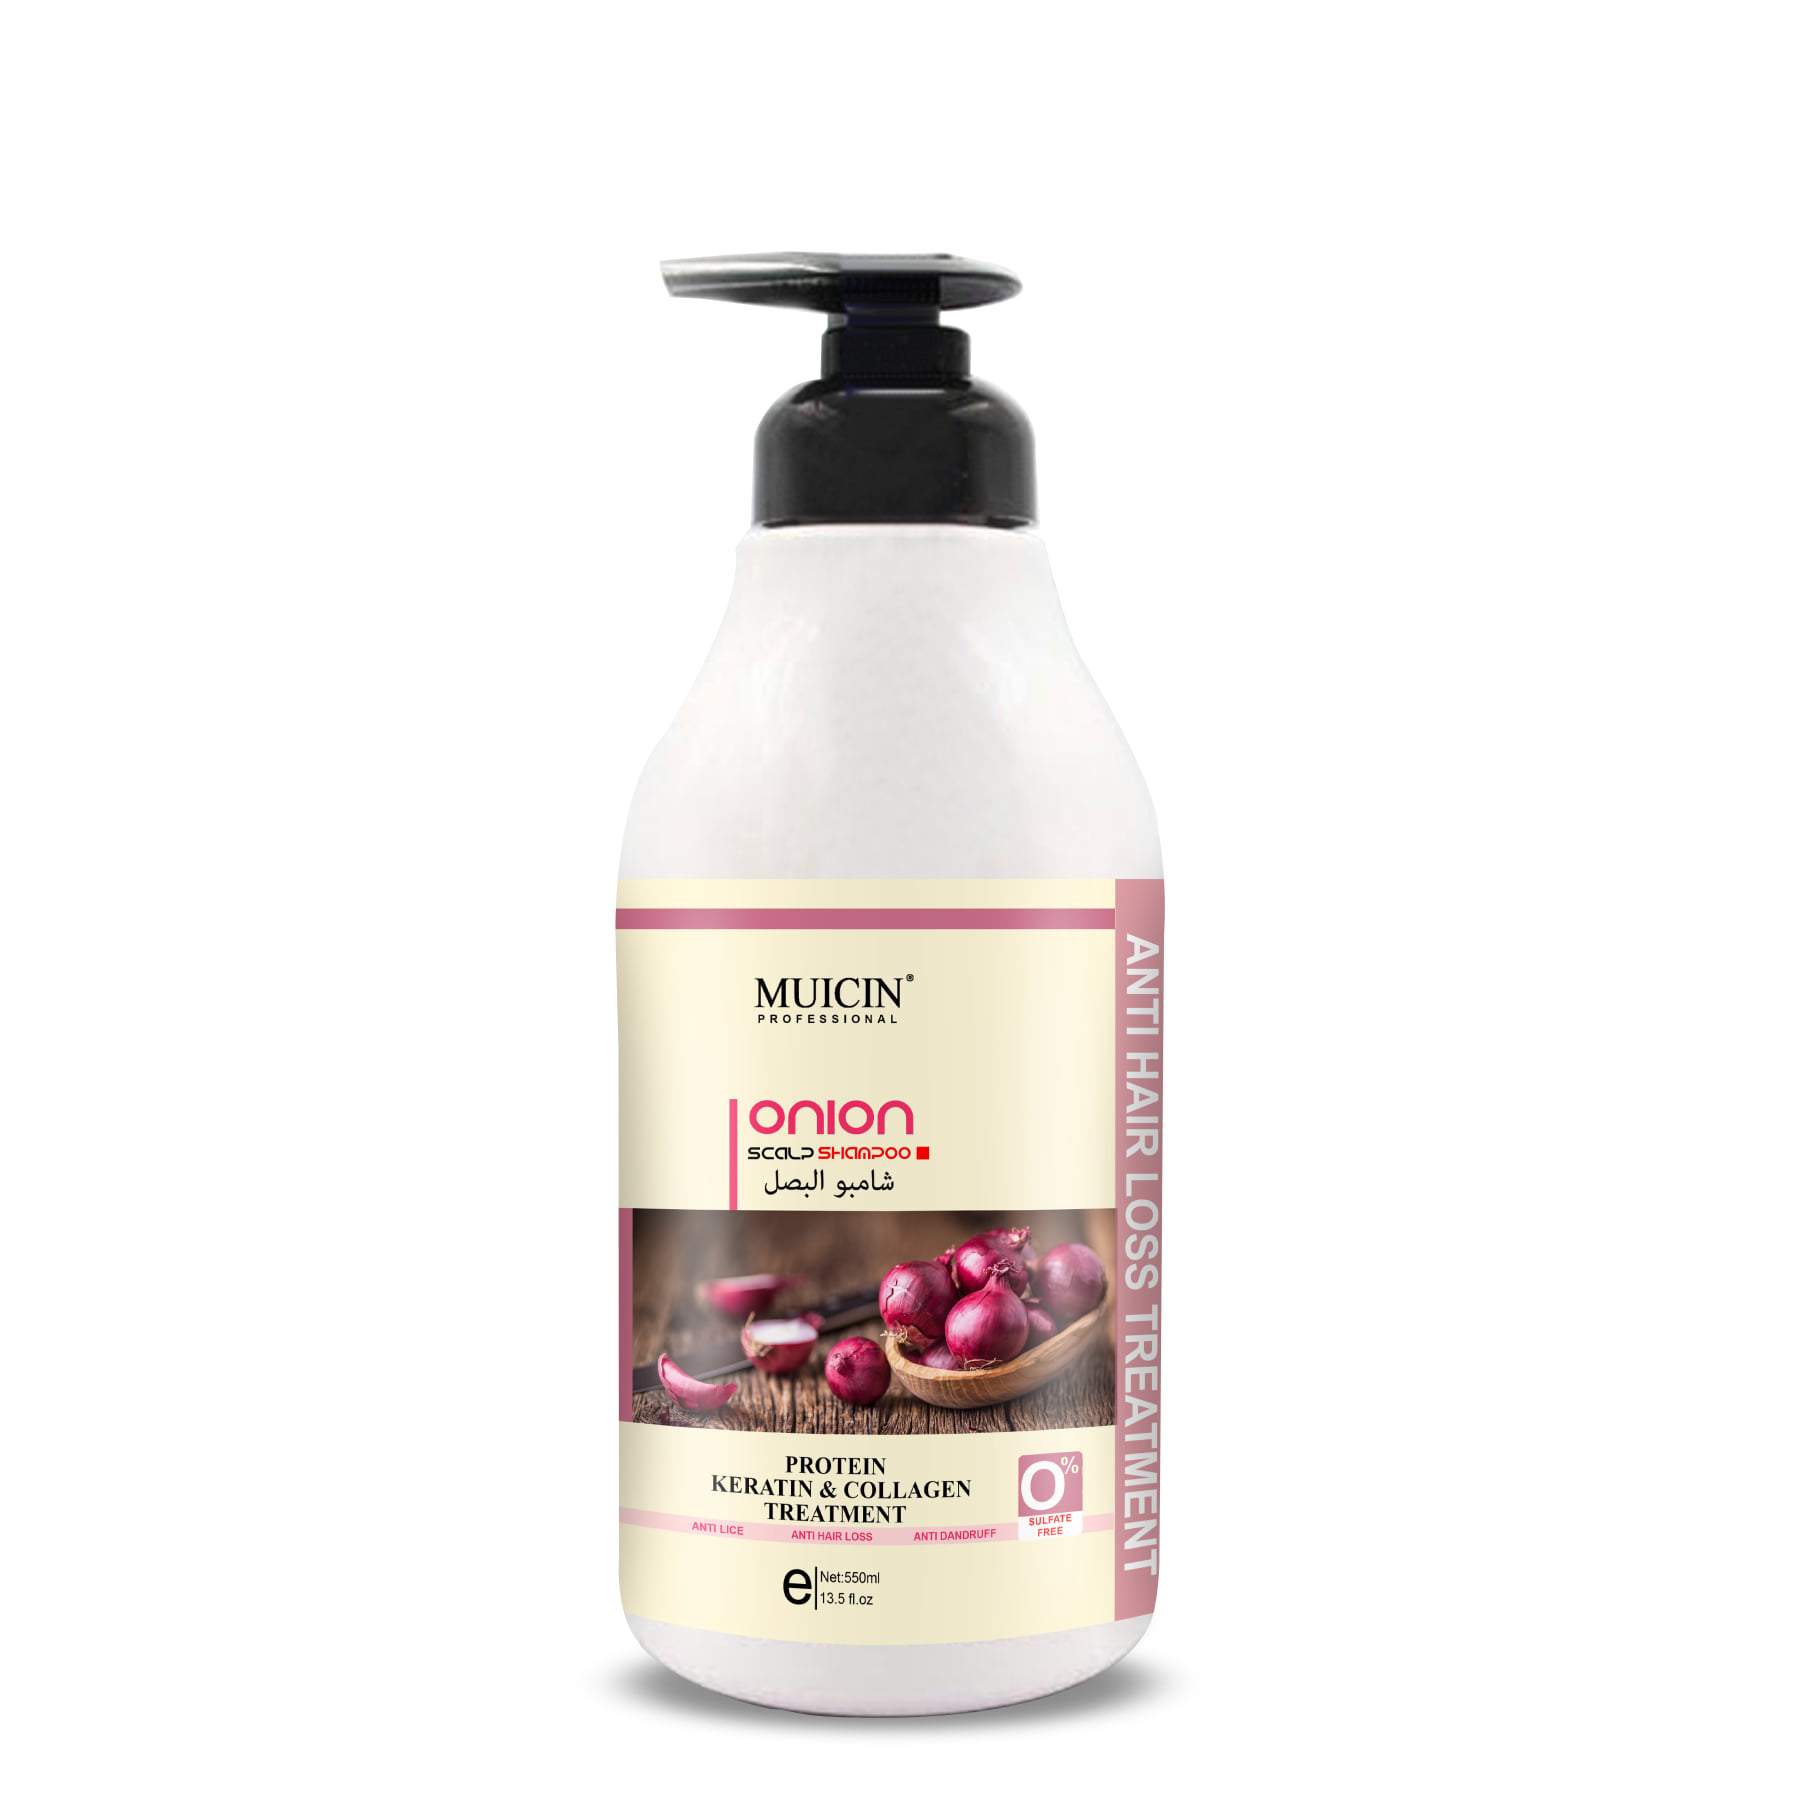 Buy  MUICIN - Onion Extract Shampoo - 550ml - at Best Price Online in Pakistan